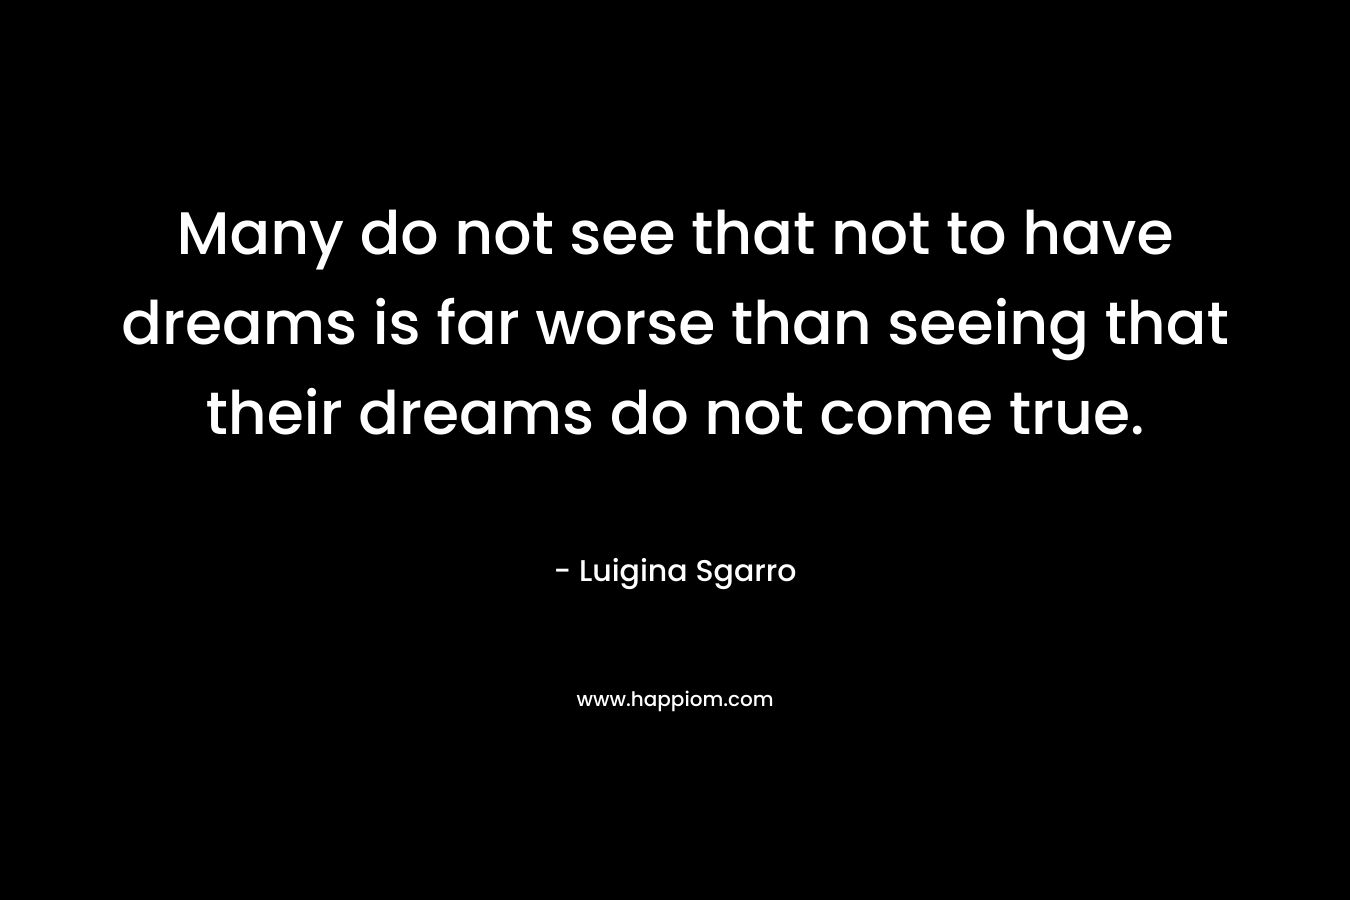 Many do not see that not to have dreams is far worse than seeing that their dreams do not come true.